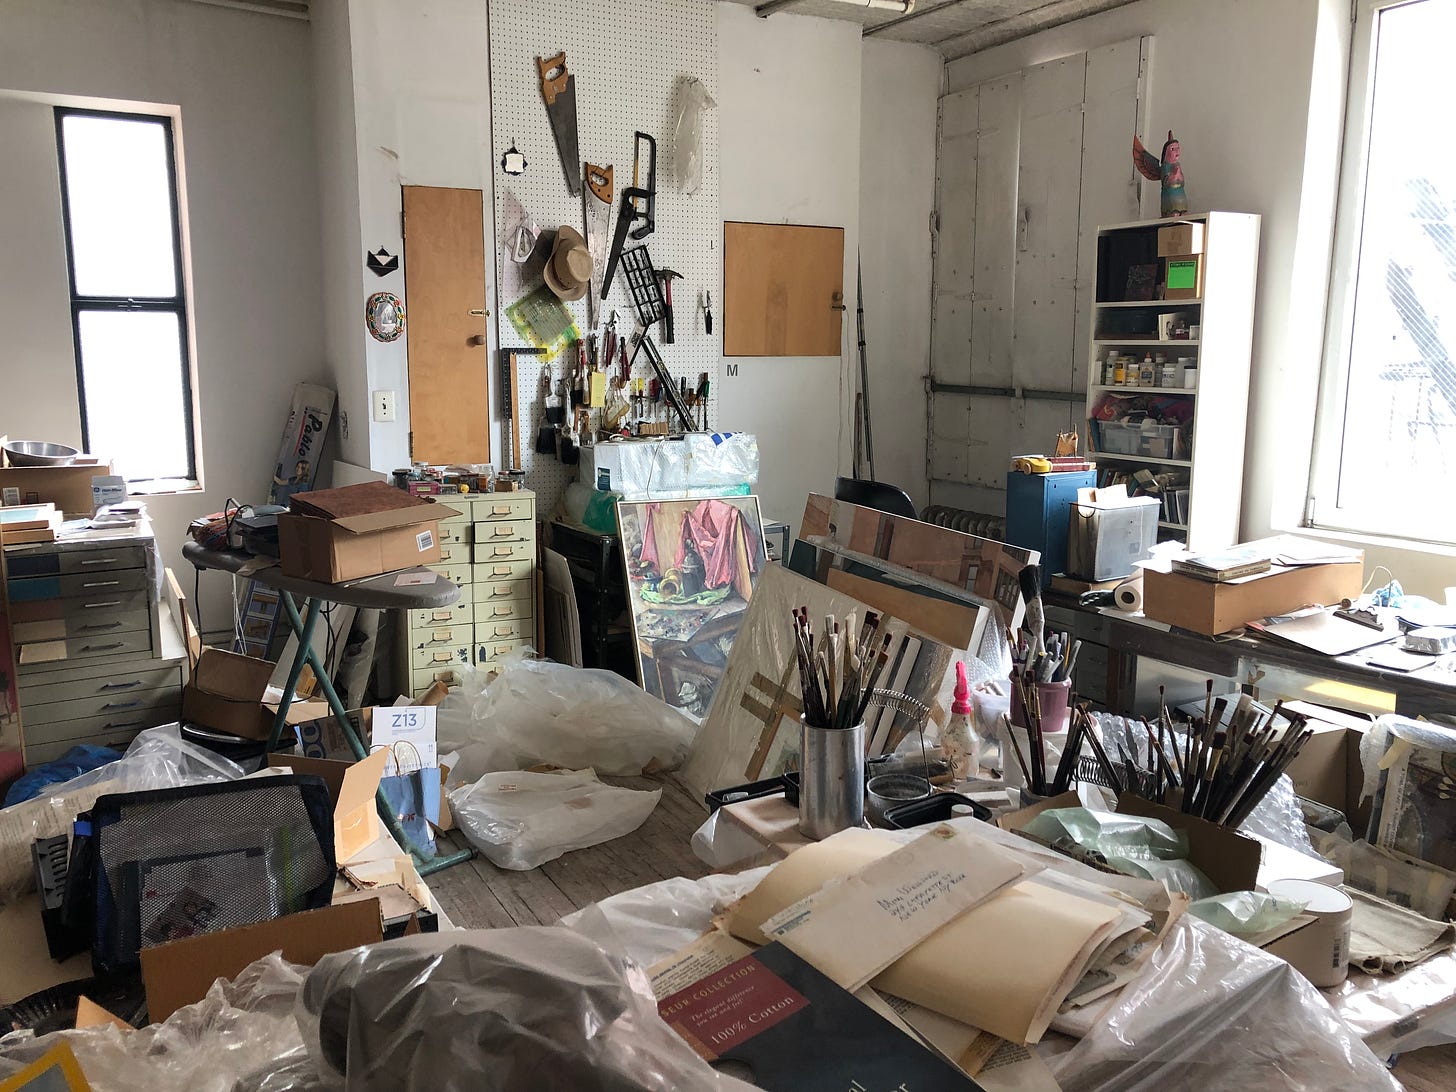 A corner of an art studio full of art,  tools, supplies, paintings, in a jumbled mess.